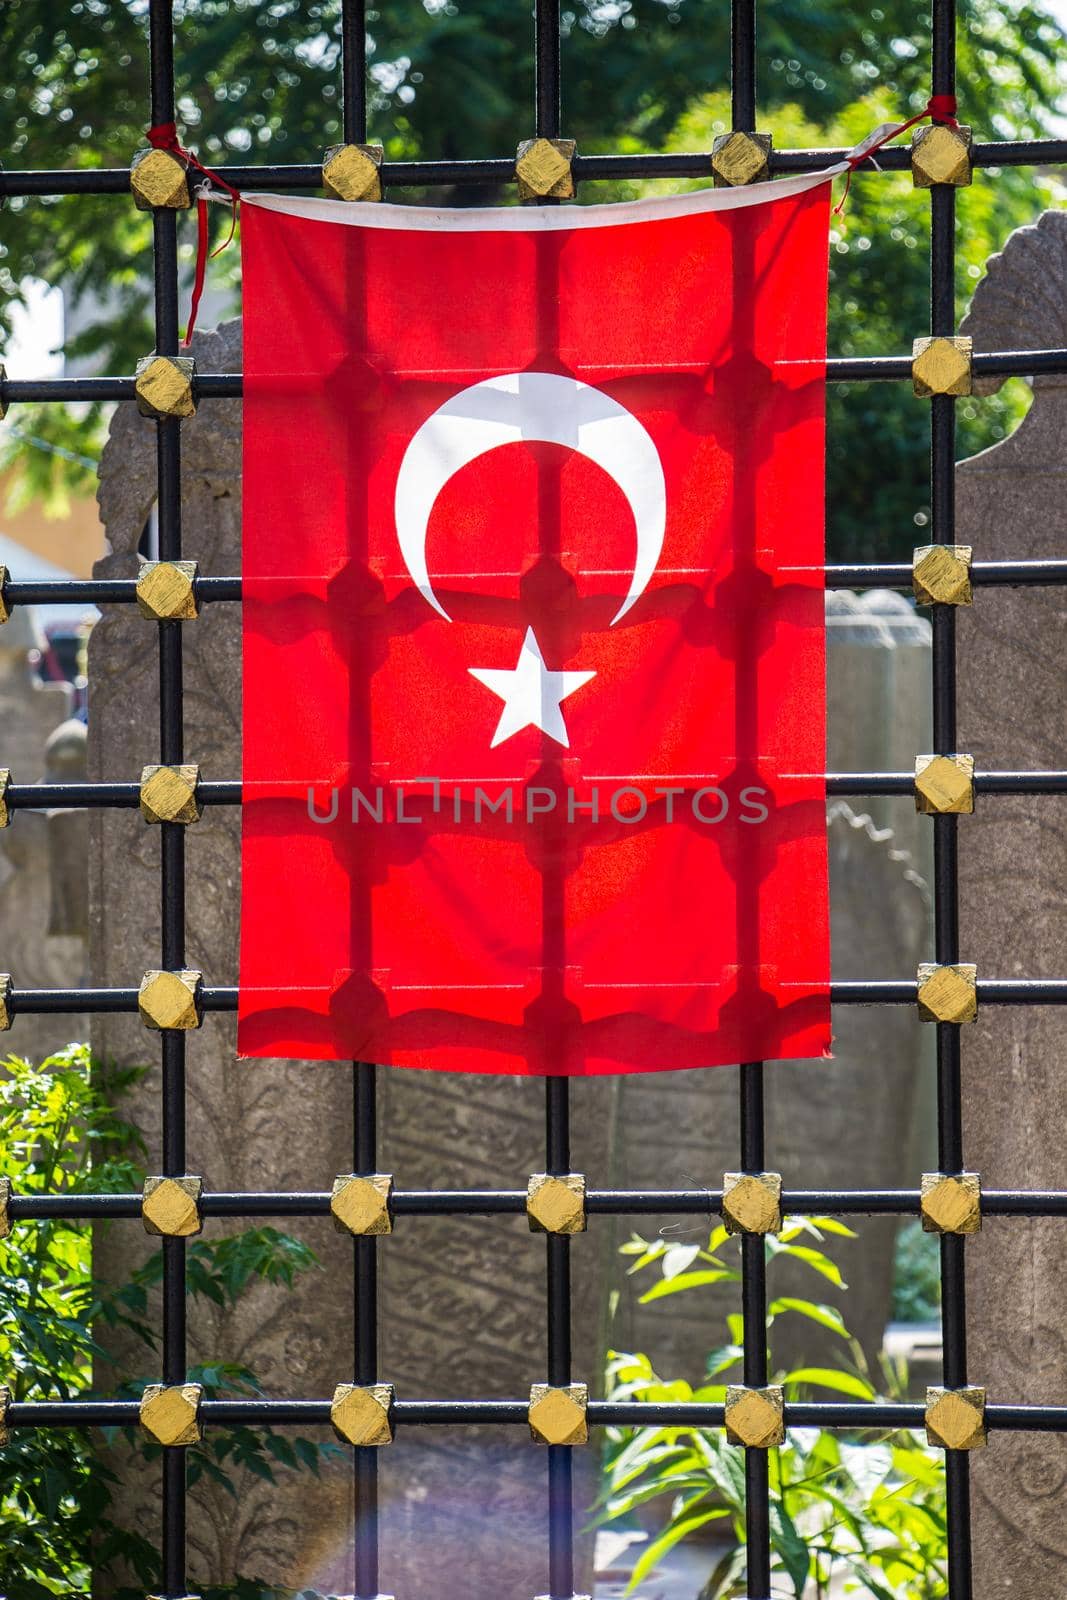 Turkish national flag with white star and moon in the view